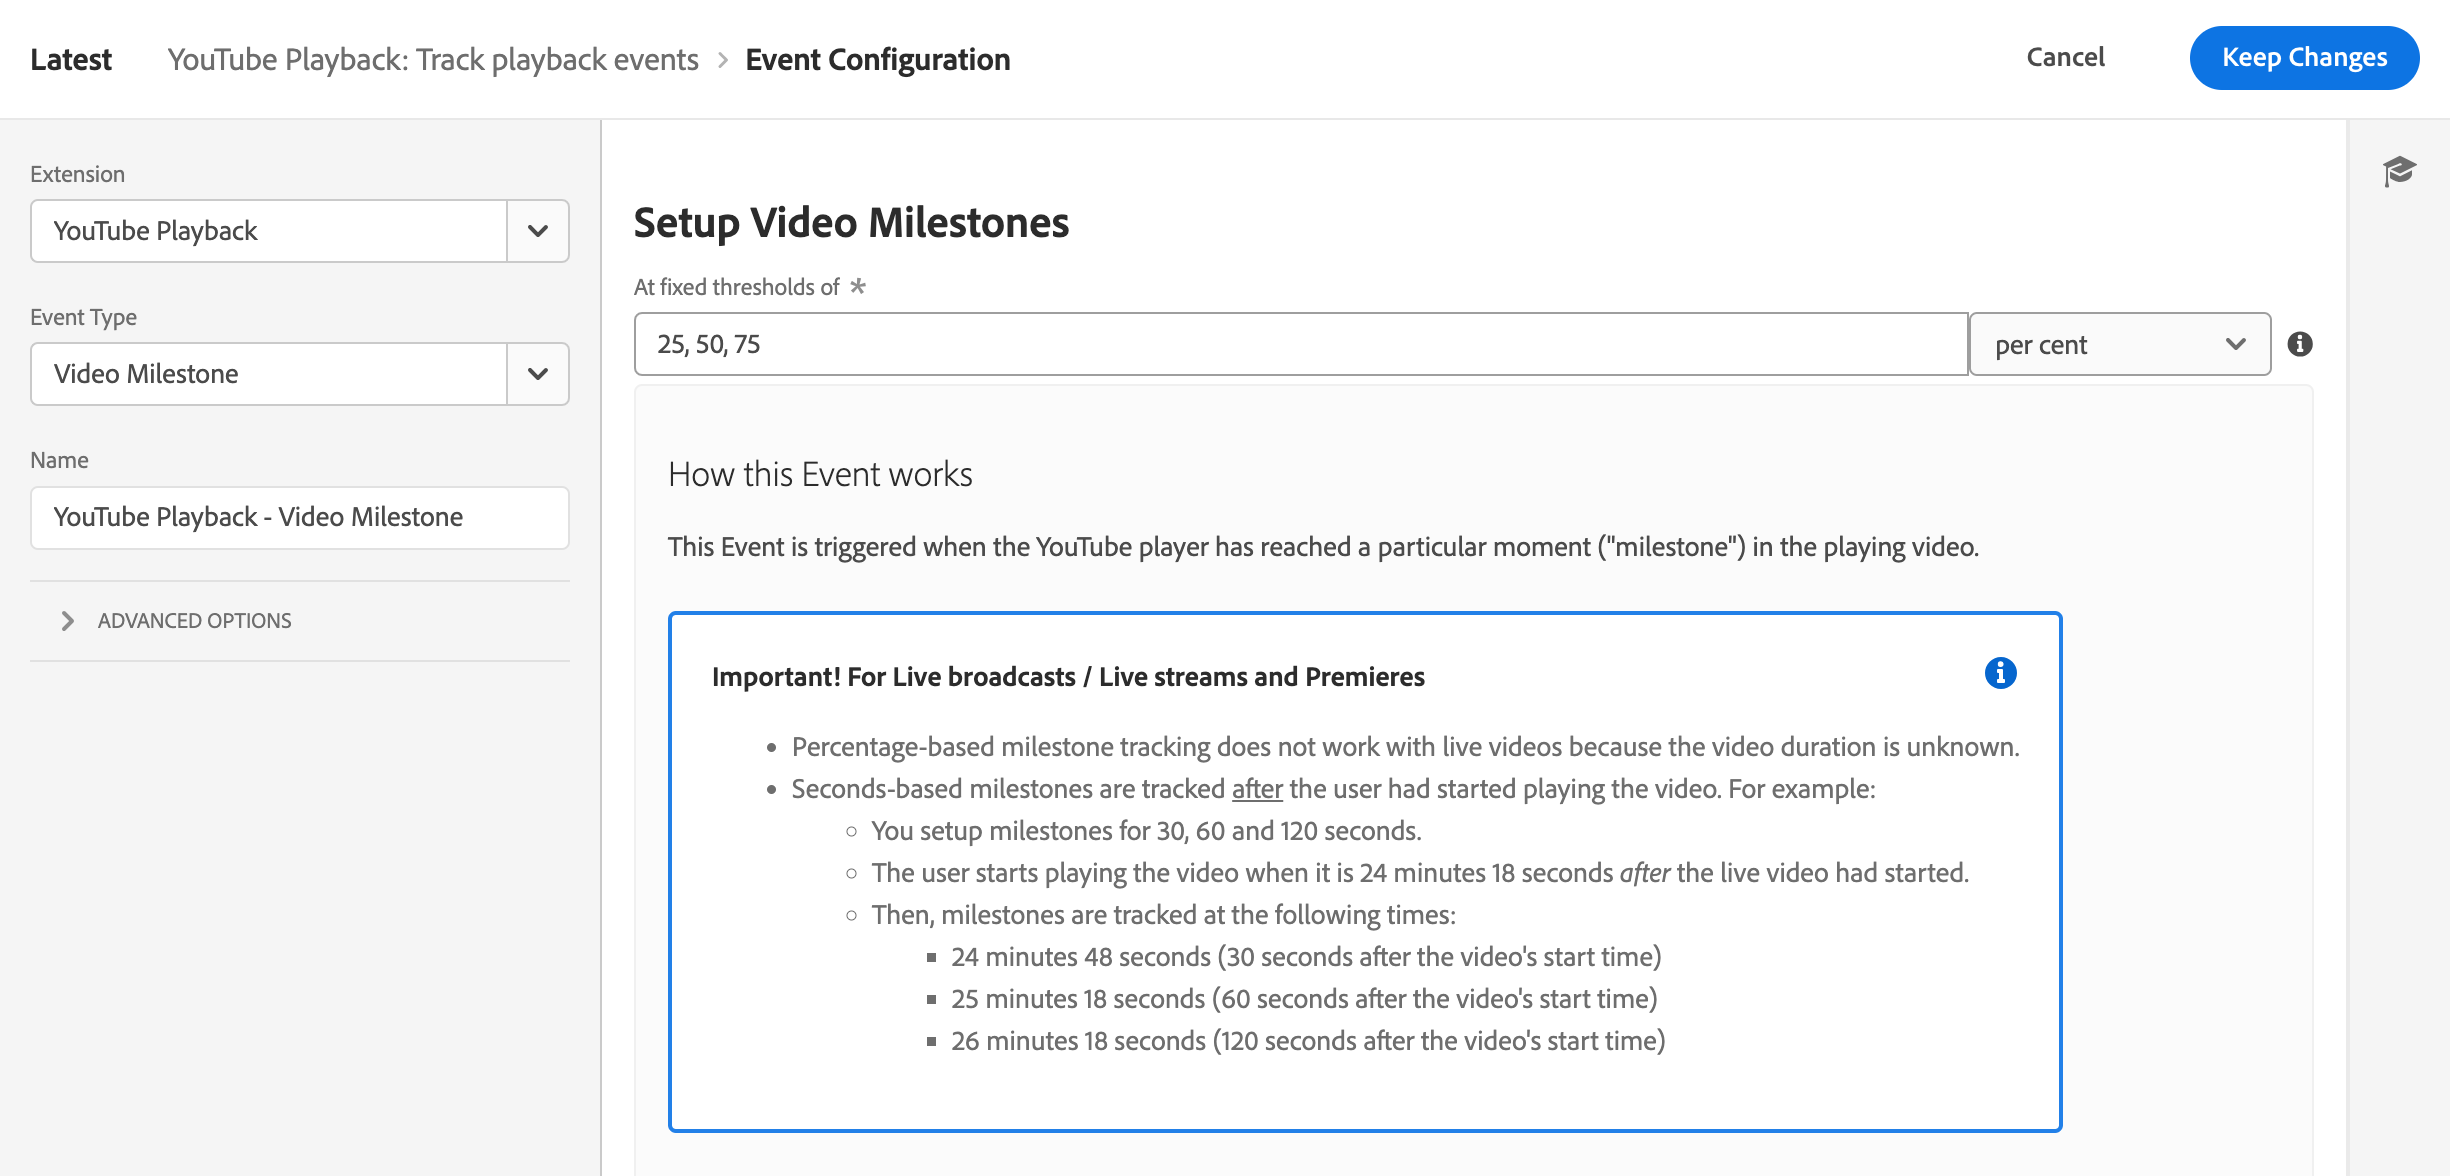 [Rule: Track playback events | Event: YouTube Playback > Video Milestone]